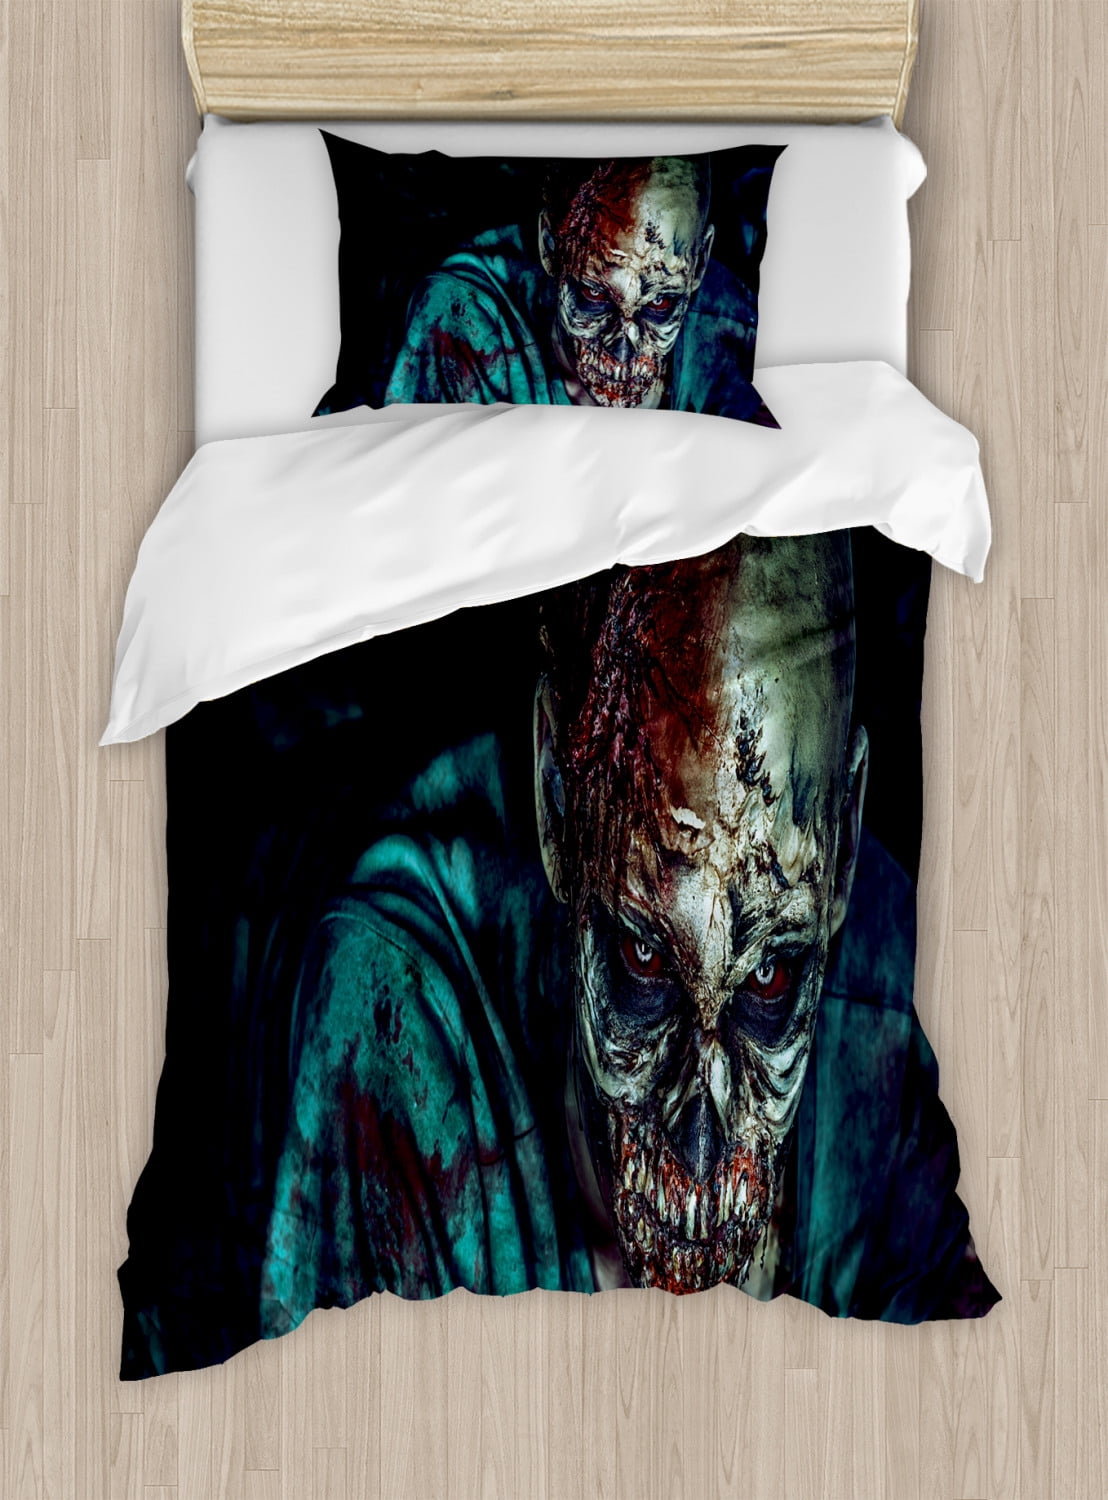 Zombie Duvet Cover Set Man Shot In Head With Bloody Details